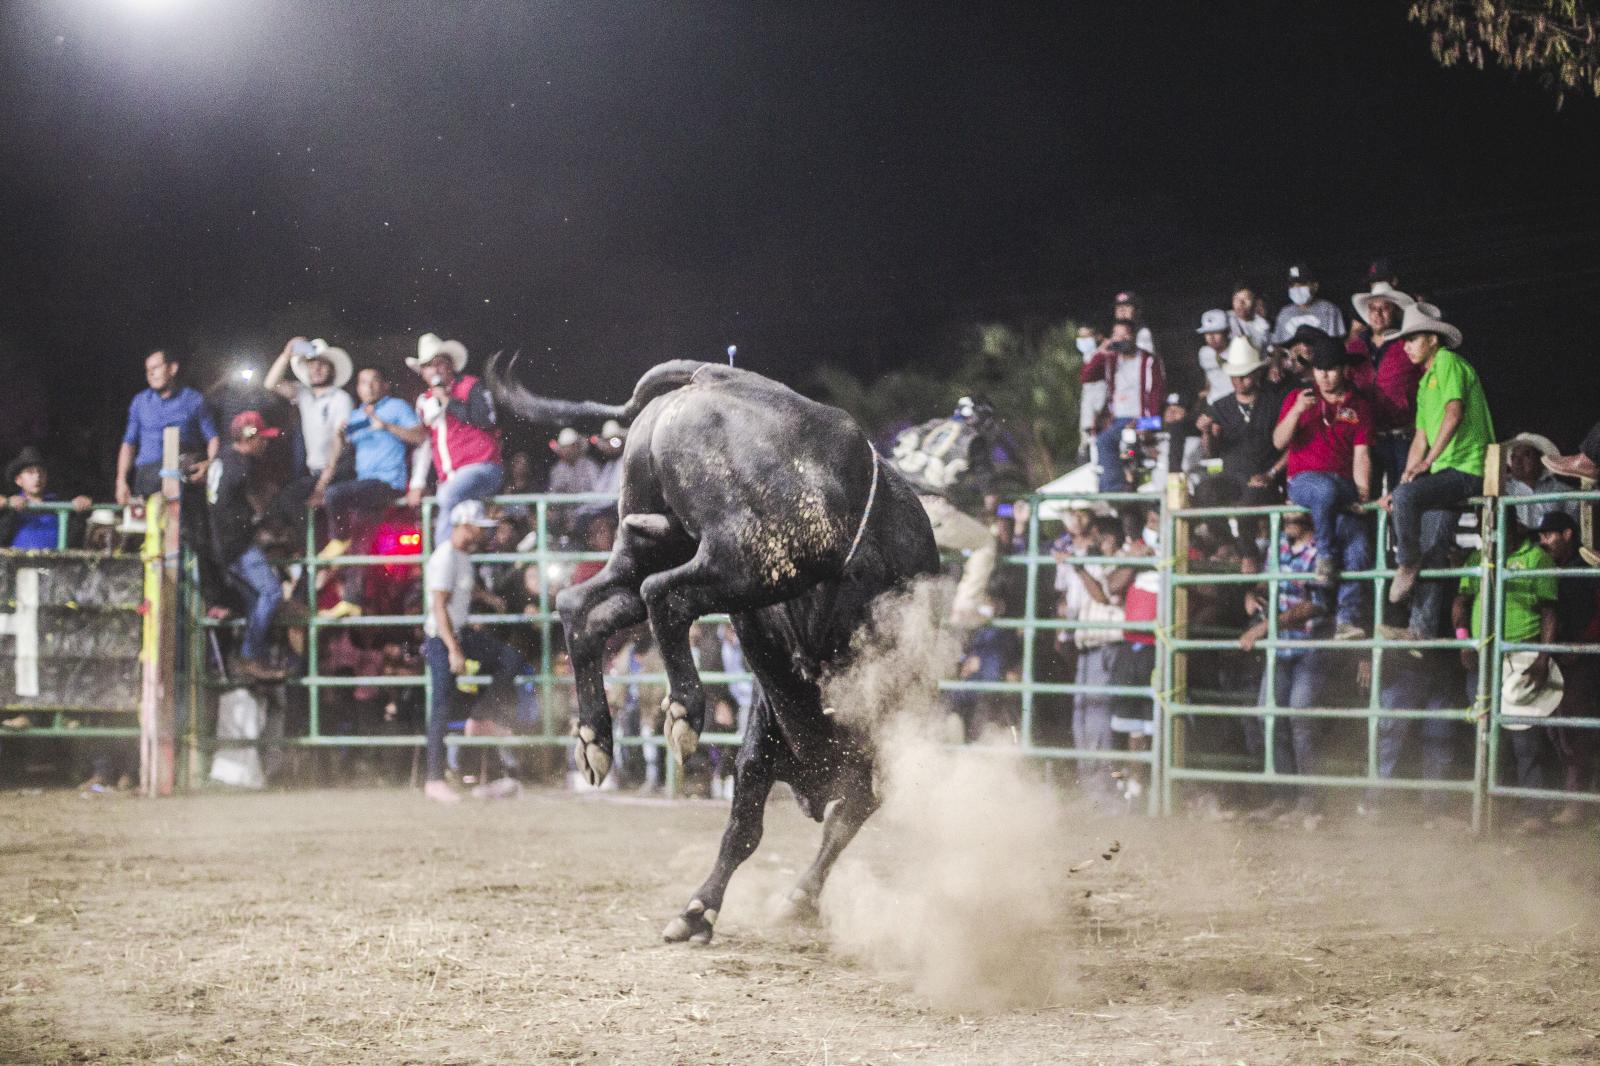 Bloomberg Businessweek - How a U.S. Remittance Windfall Saved Small Towns in Mexico - Jaripeo migrante, the FMX group organized the fair of the...